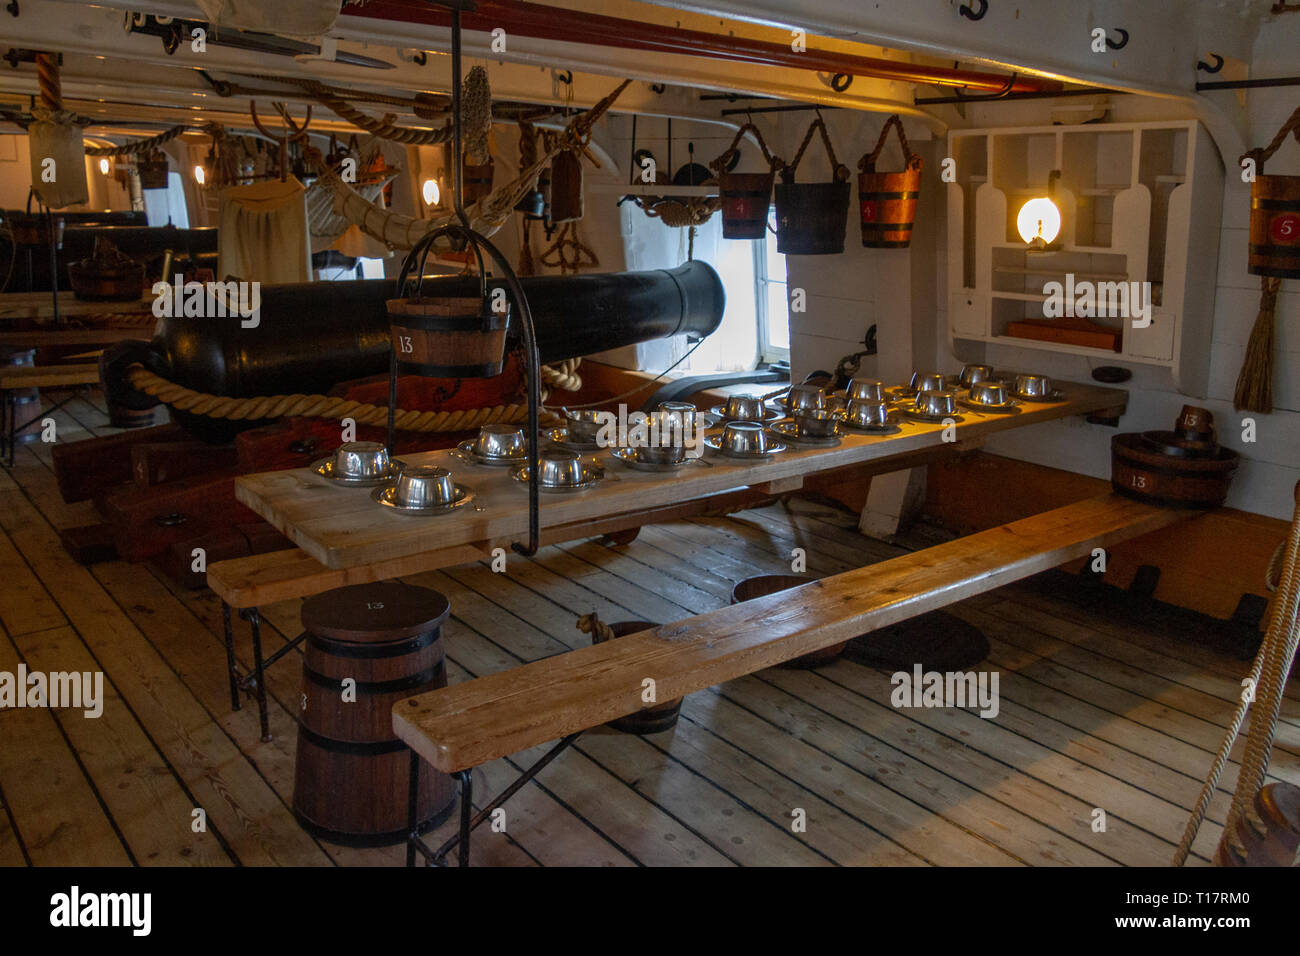 Dining table laid out below deck on the gun deck of HMS Warrior (1860), Portsmouth Historic Dockyard, UK. Stock Photo